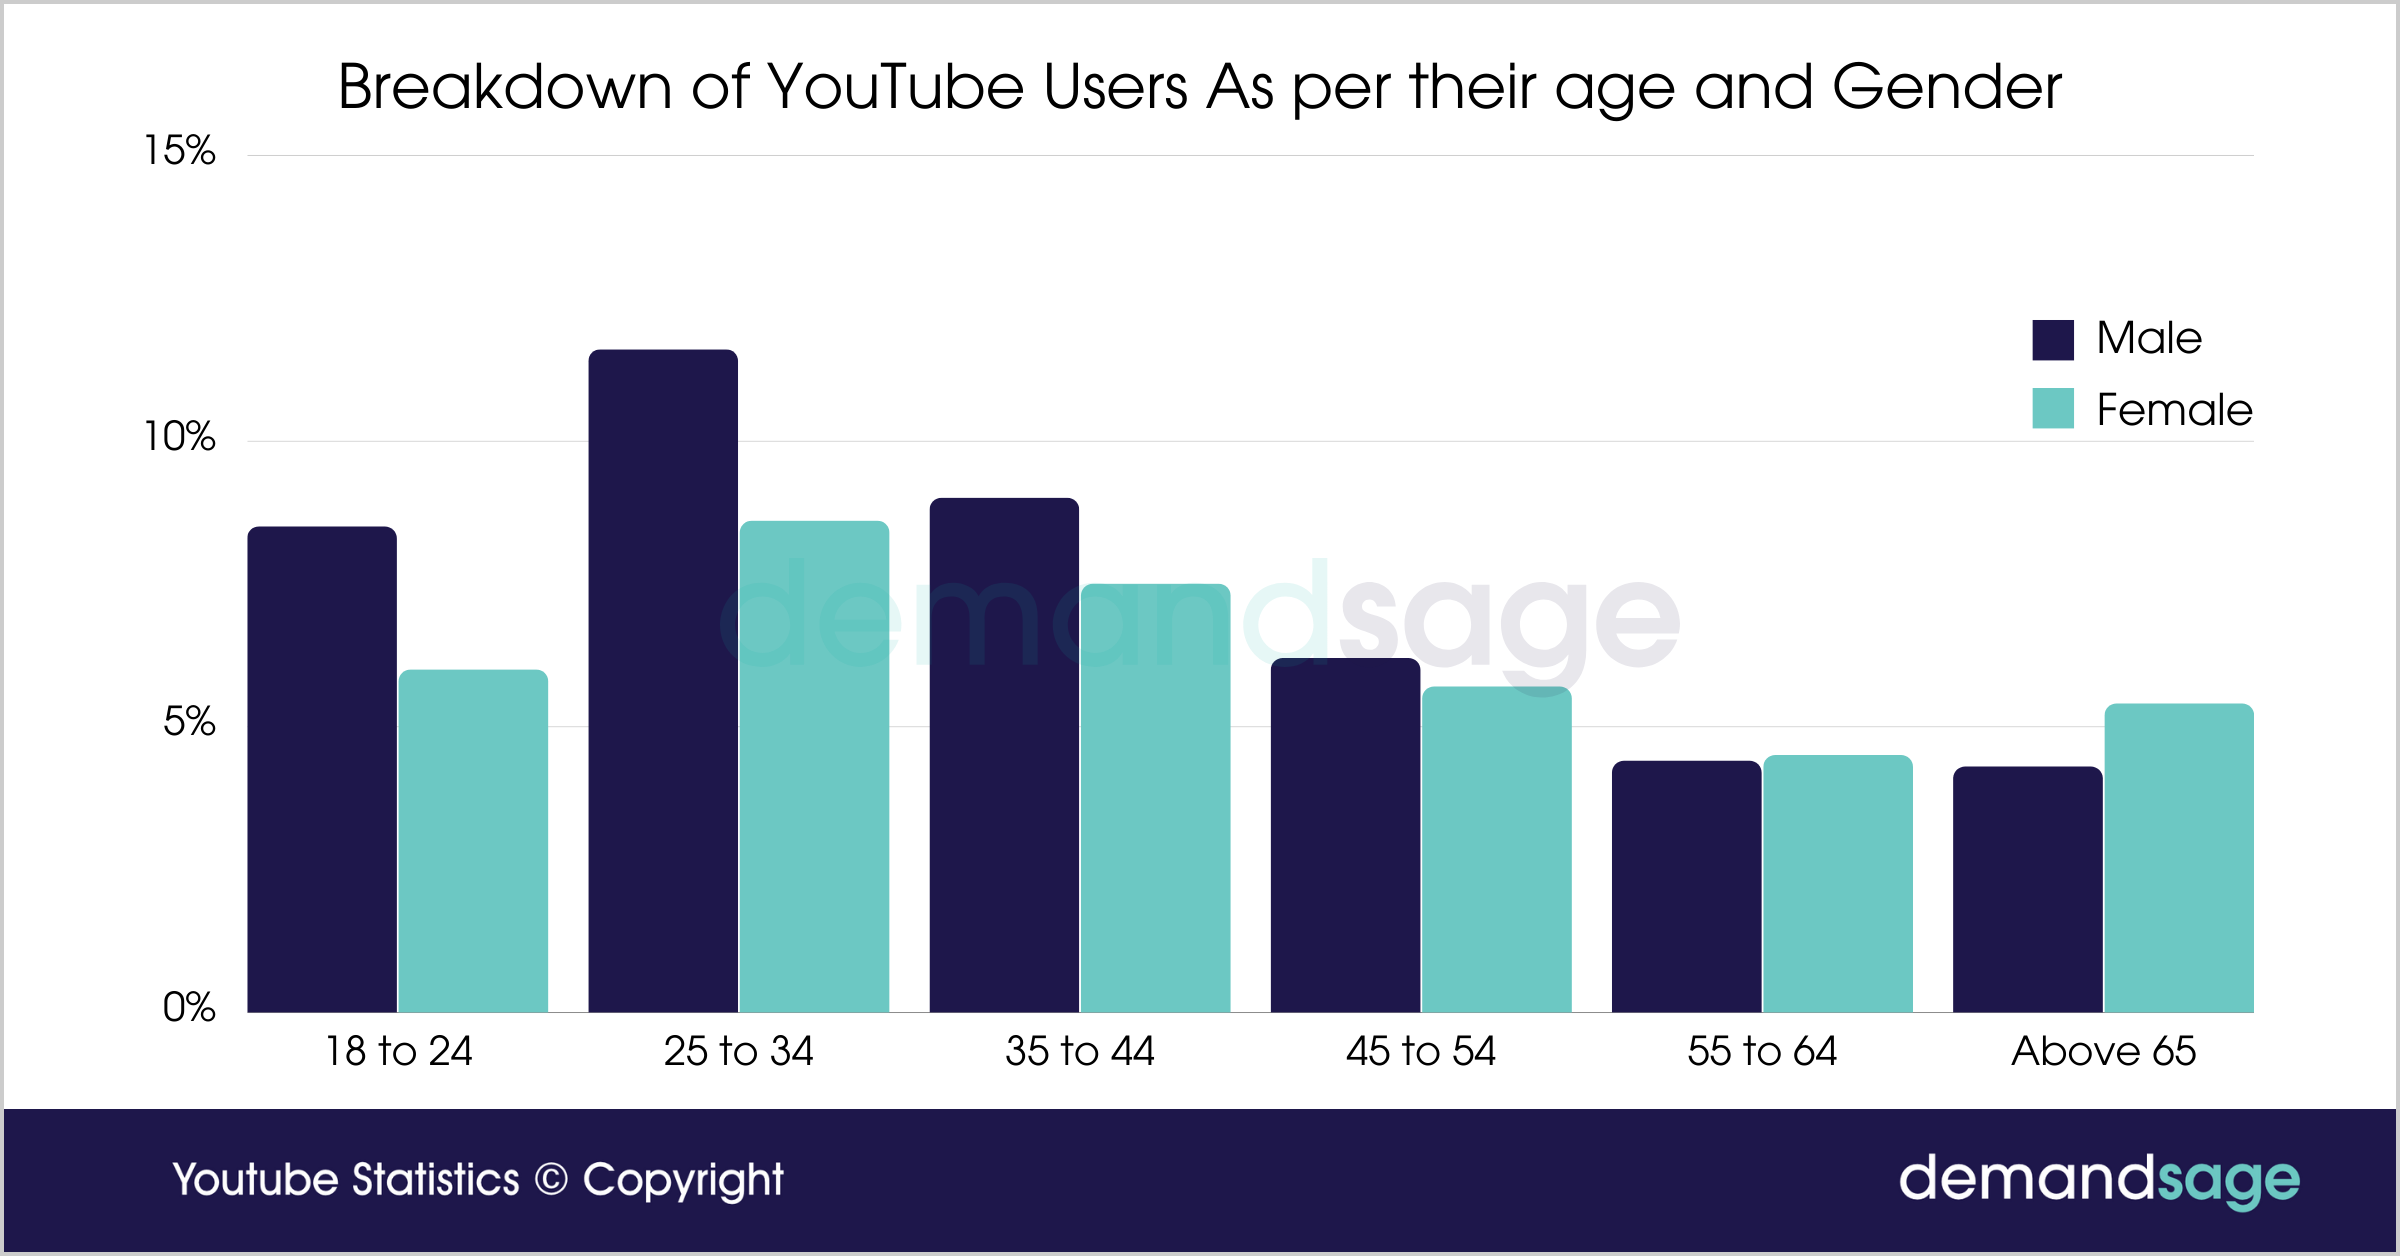 Breakdown of YouTube Users As per their age and Gender